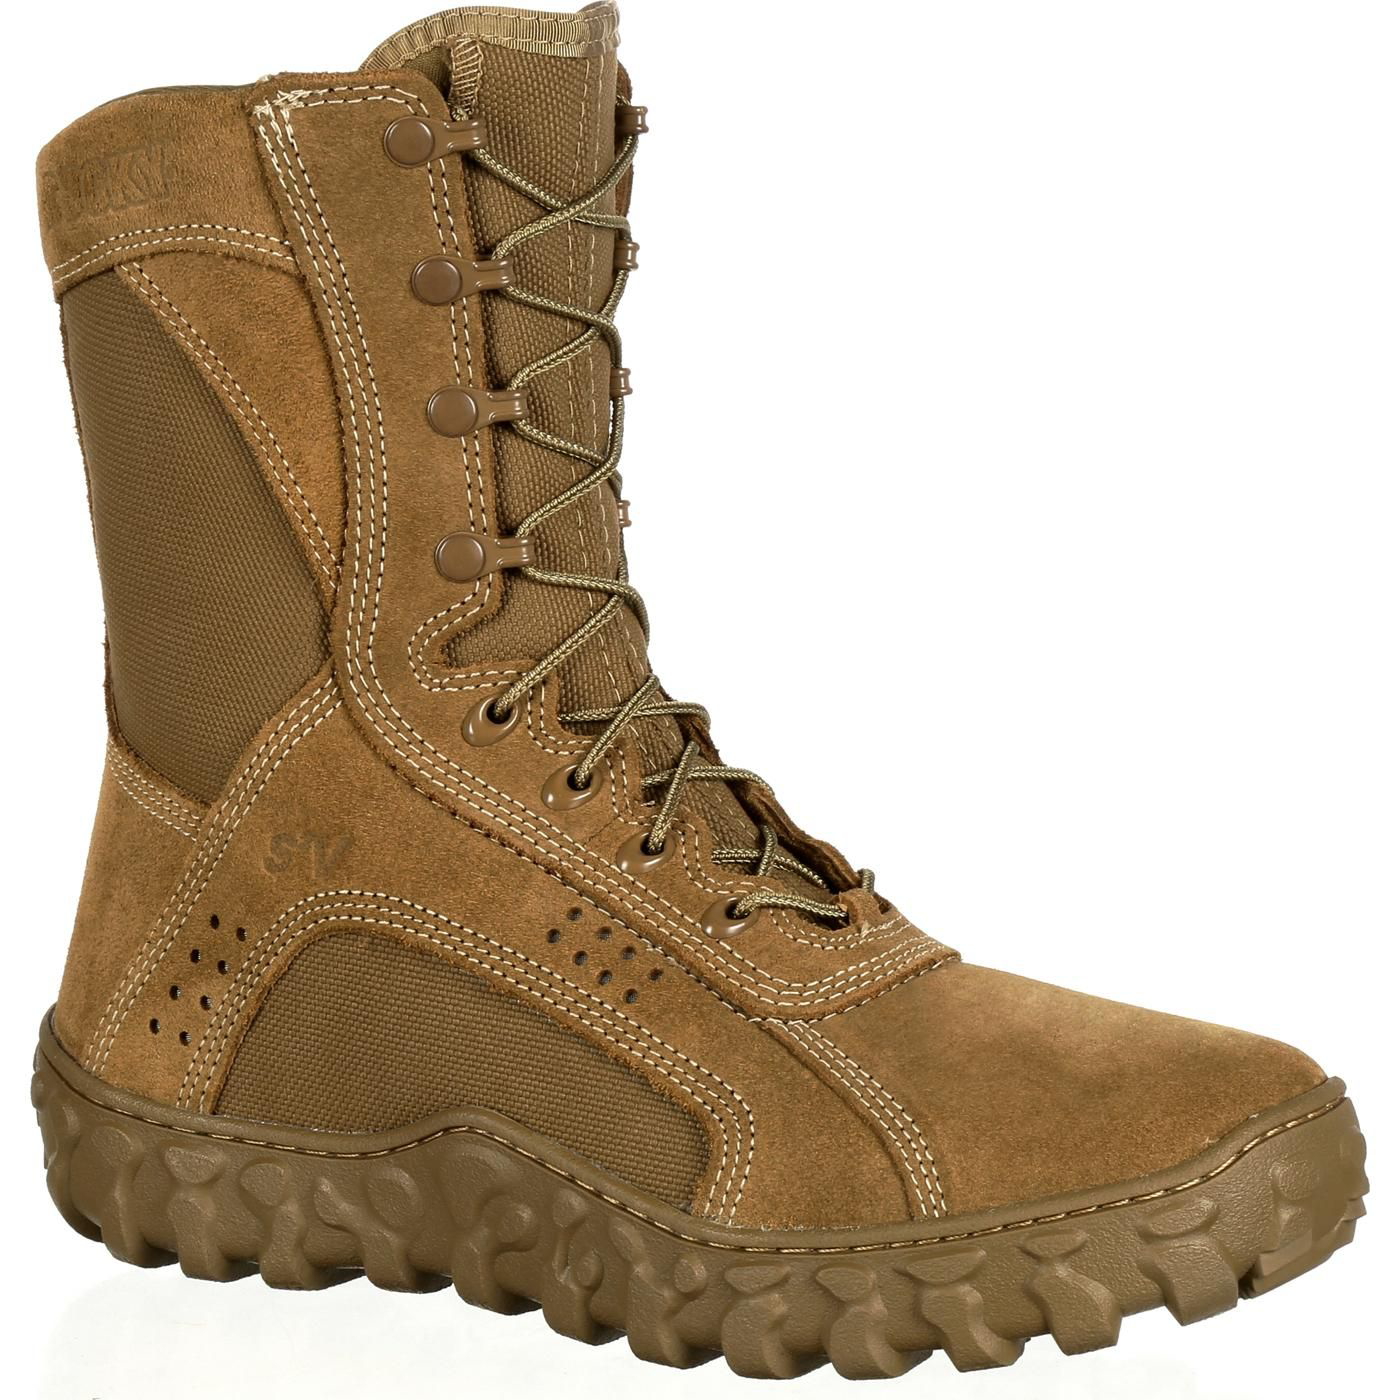 Rocky S2V Tactical Military Boots for Men - Coyote Brown - 10W